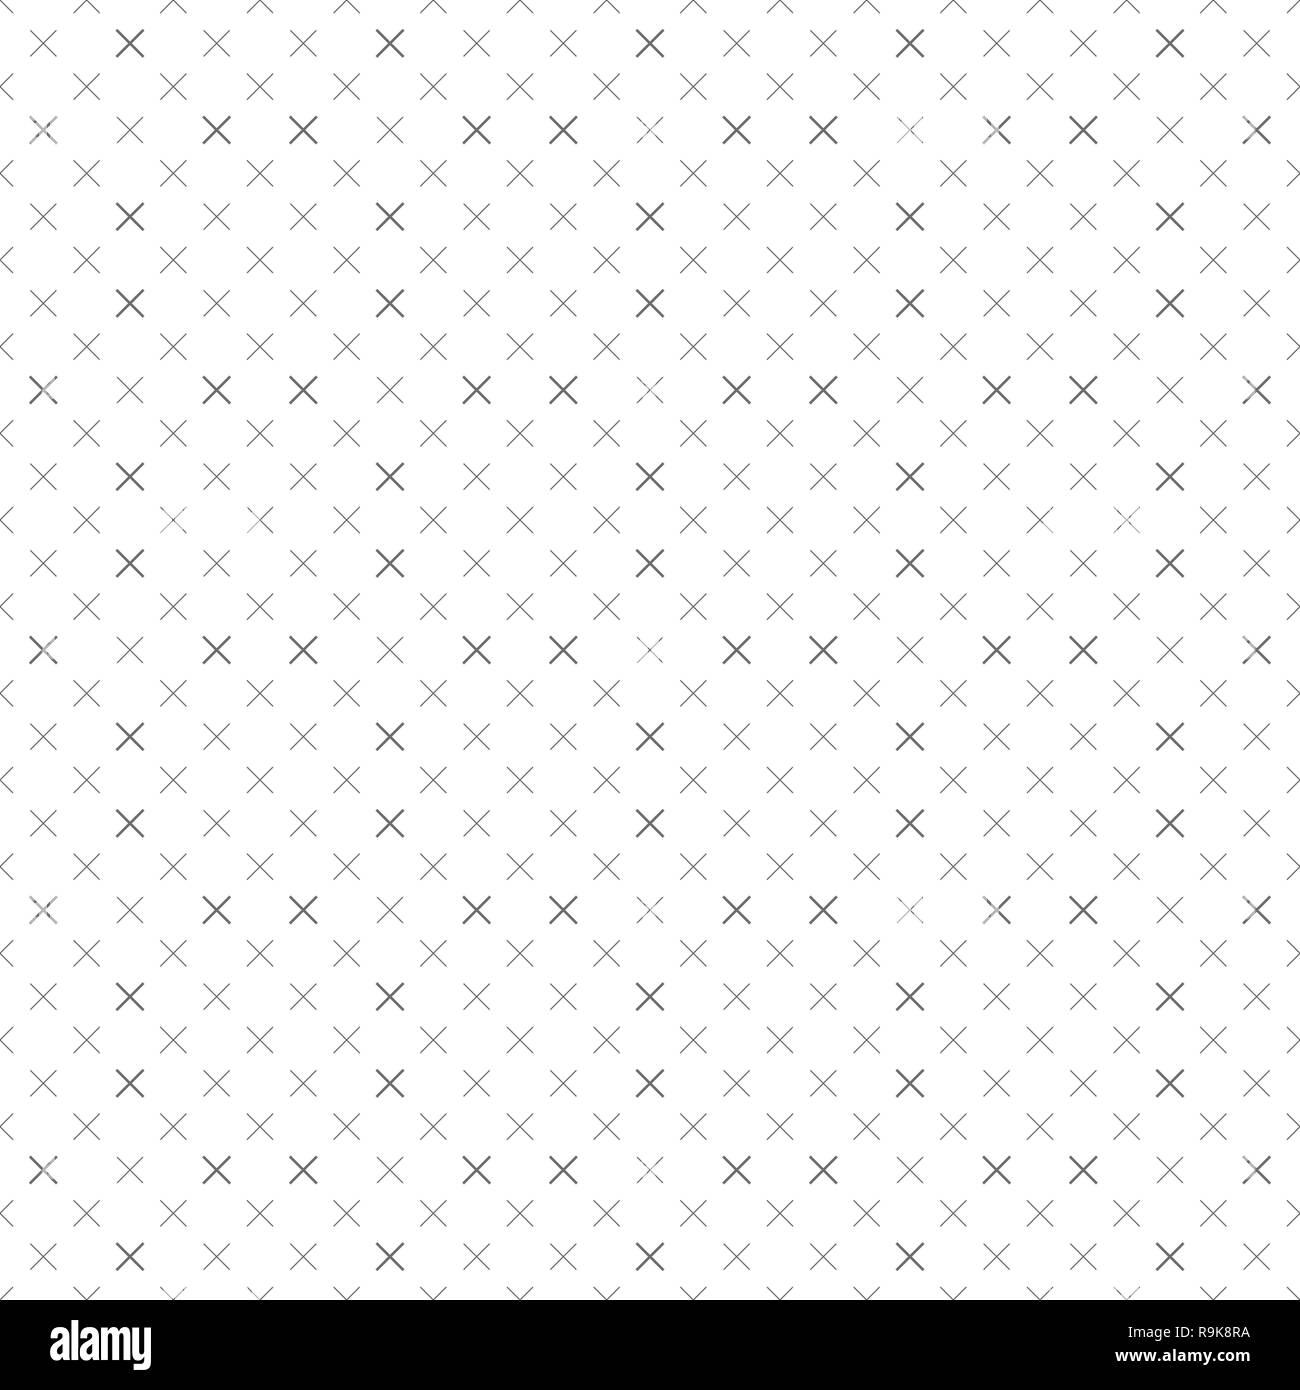 Vector seamless pattern. Minimalist simple geometrical texture. Repeating small thin line crosses. Surface for wrapping paper, shirts, cloths. Minimal Stock Vector